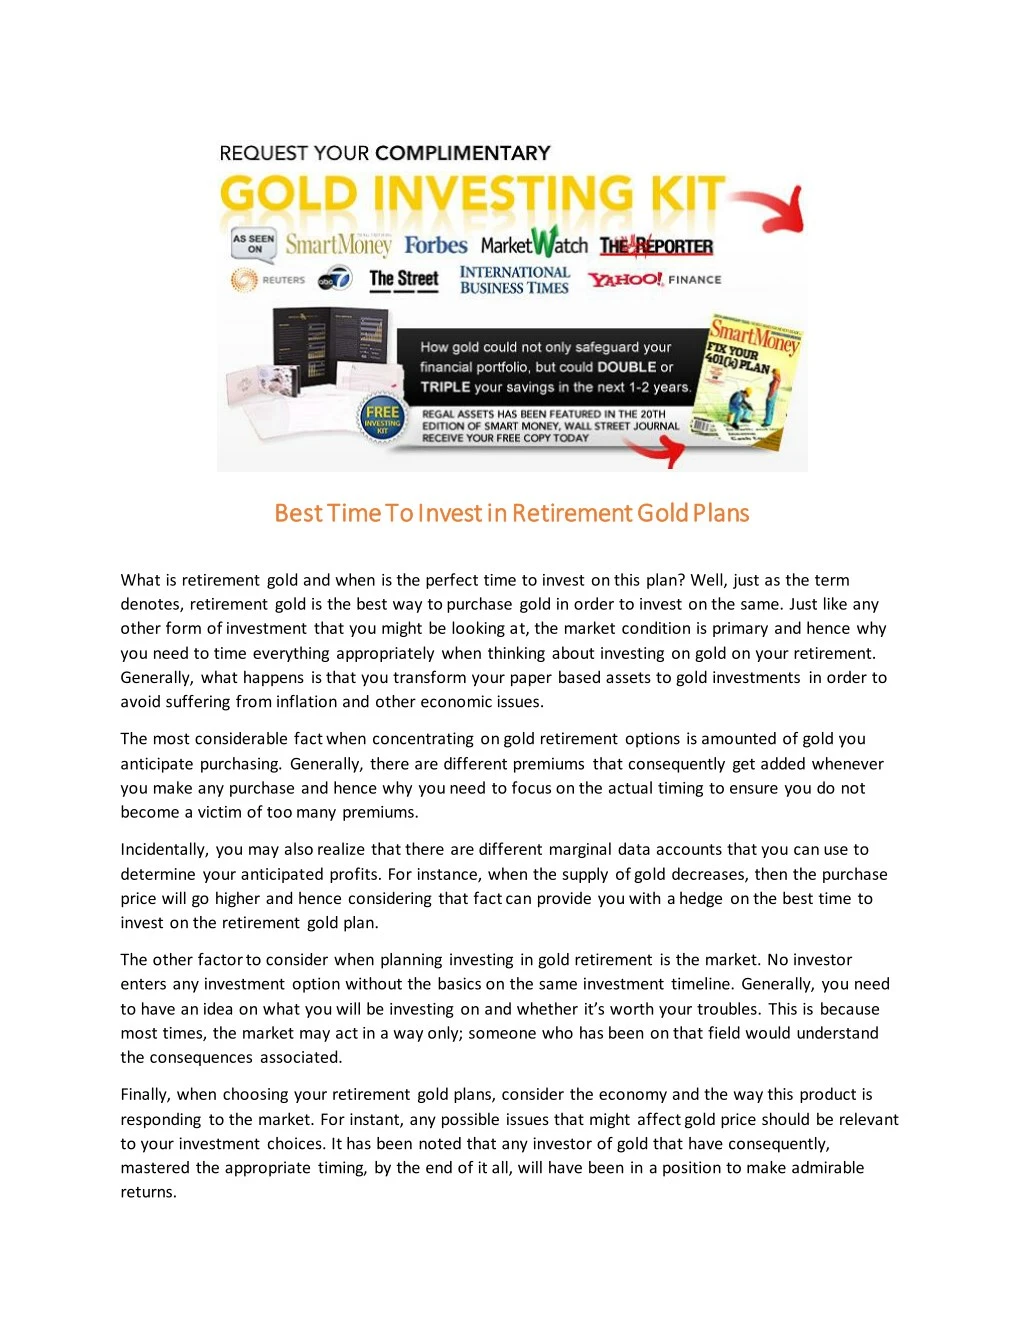 best time to invest in retirement gold plans best